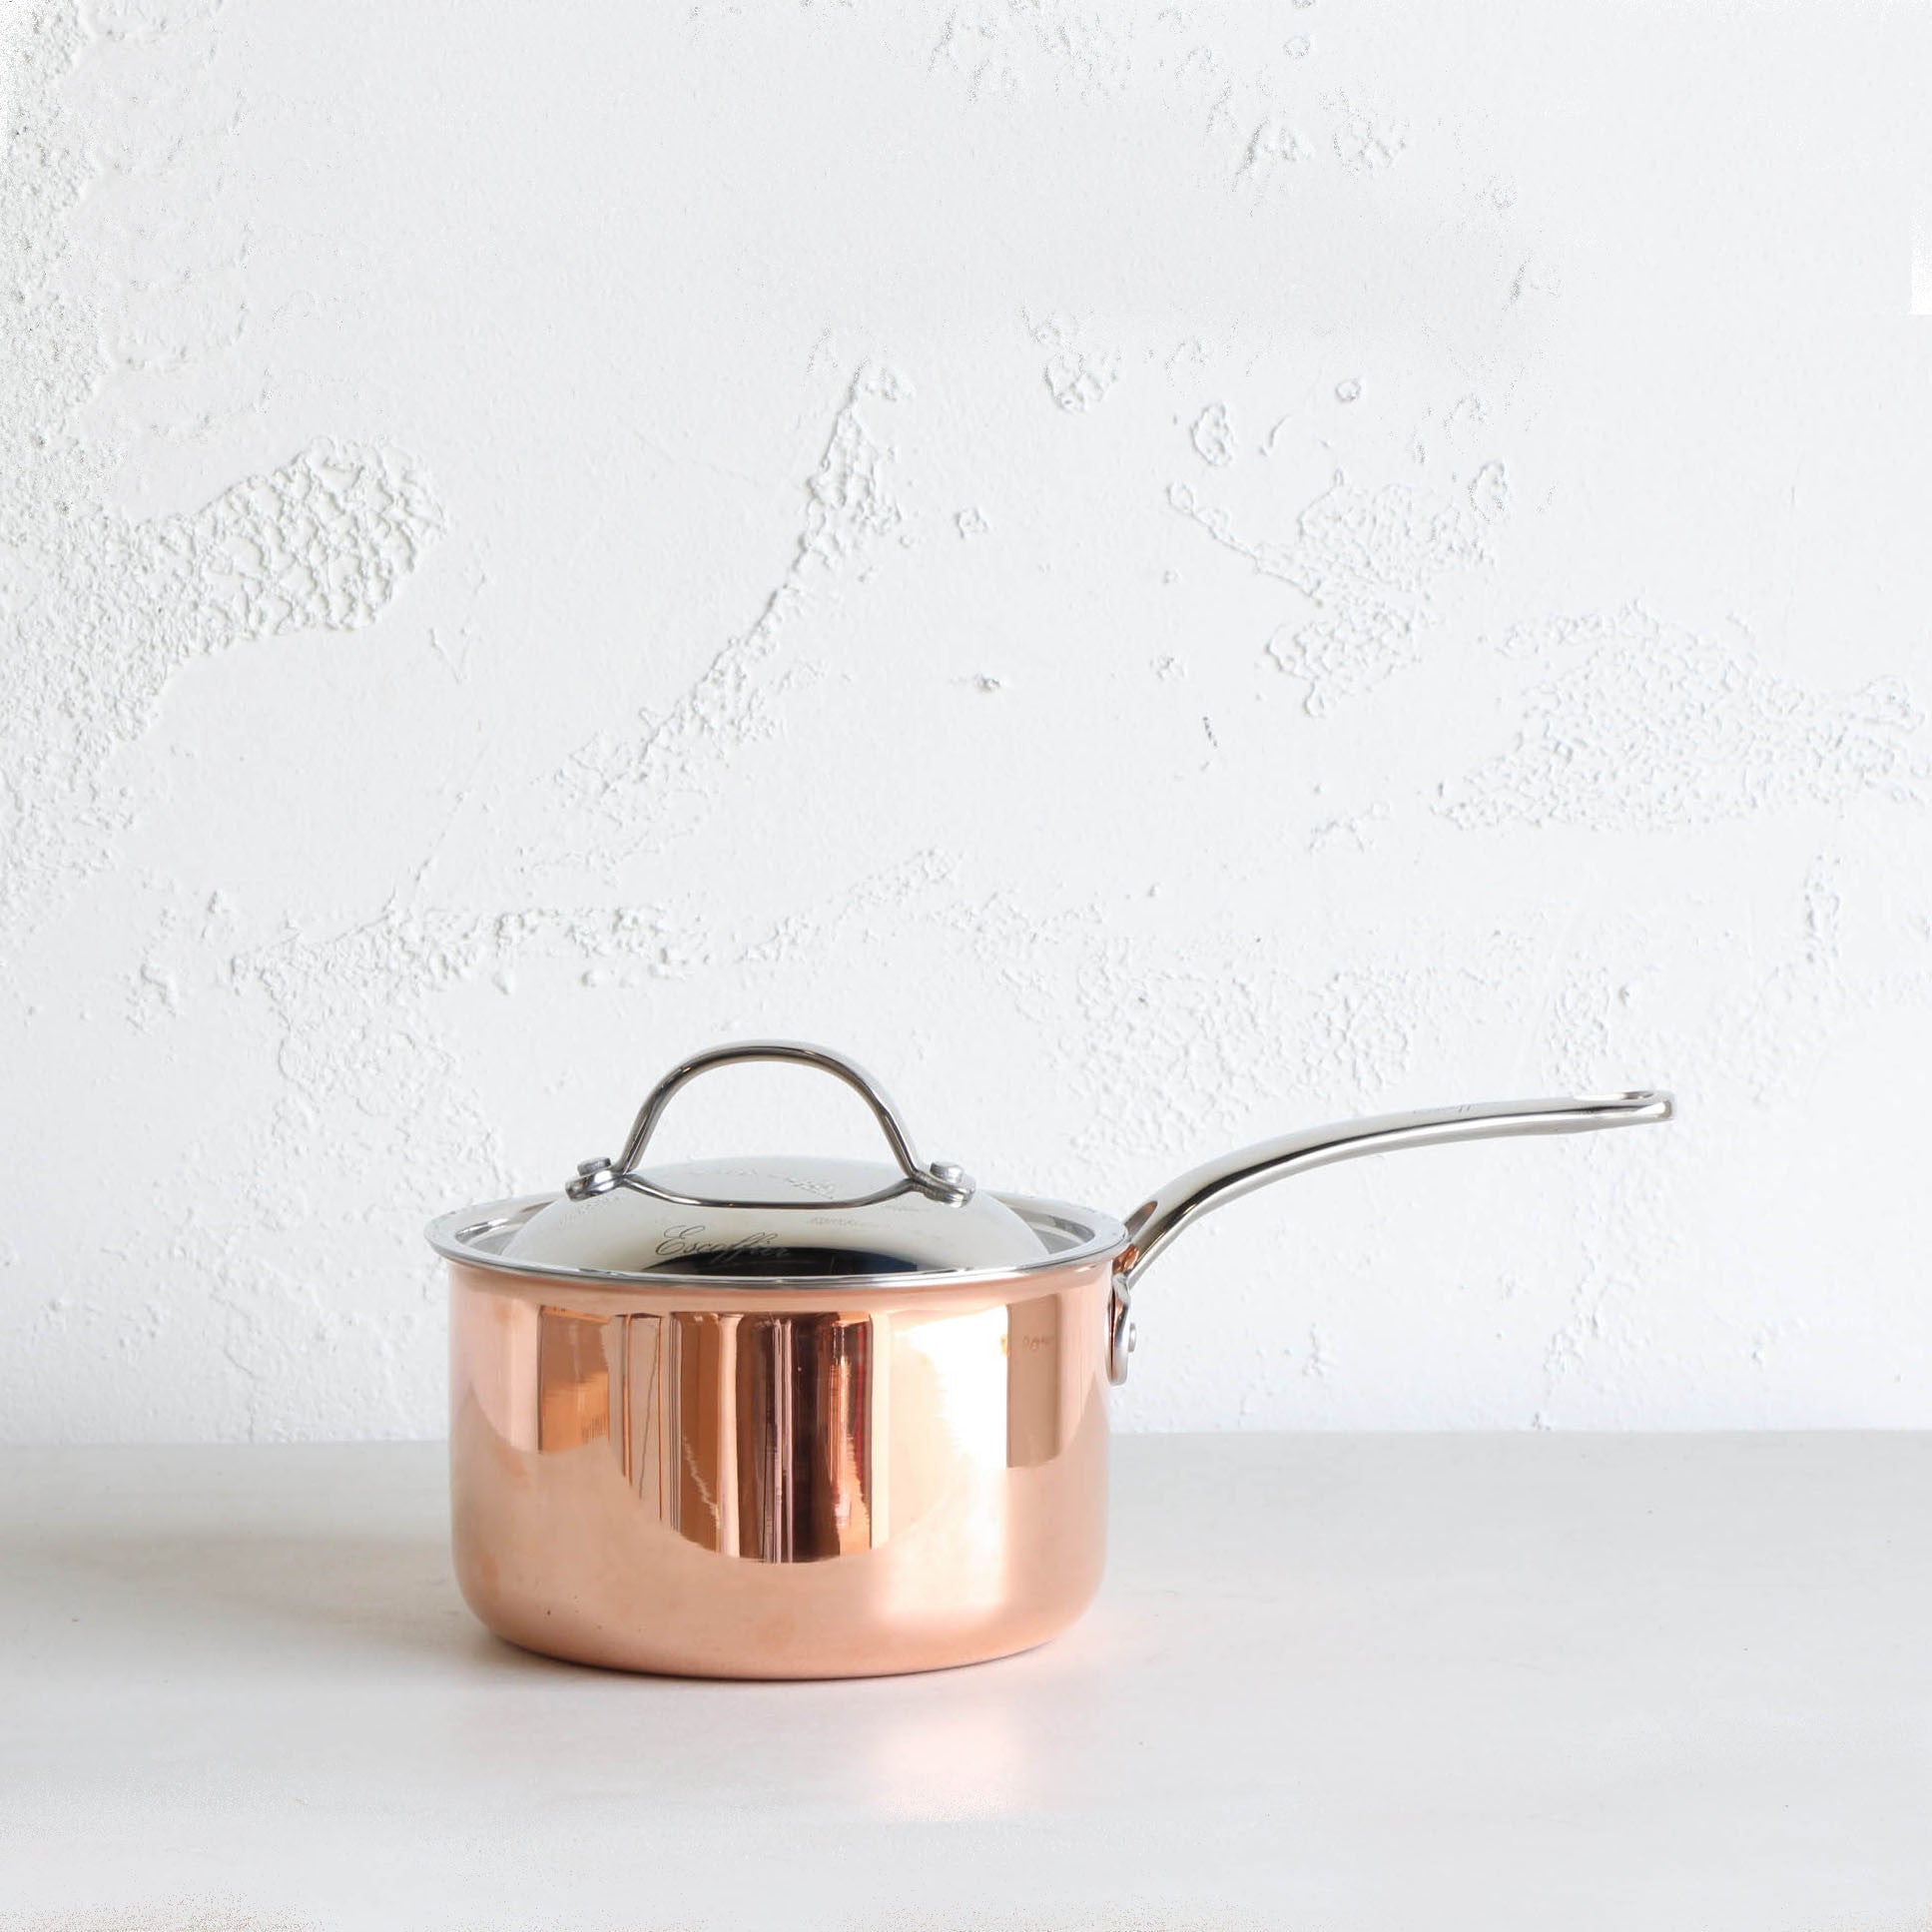 CHASSEUR COPPER + STAINLESS STEEL COOKWARE